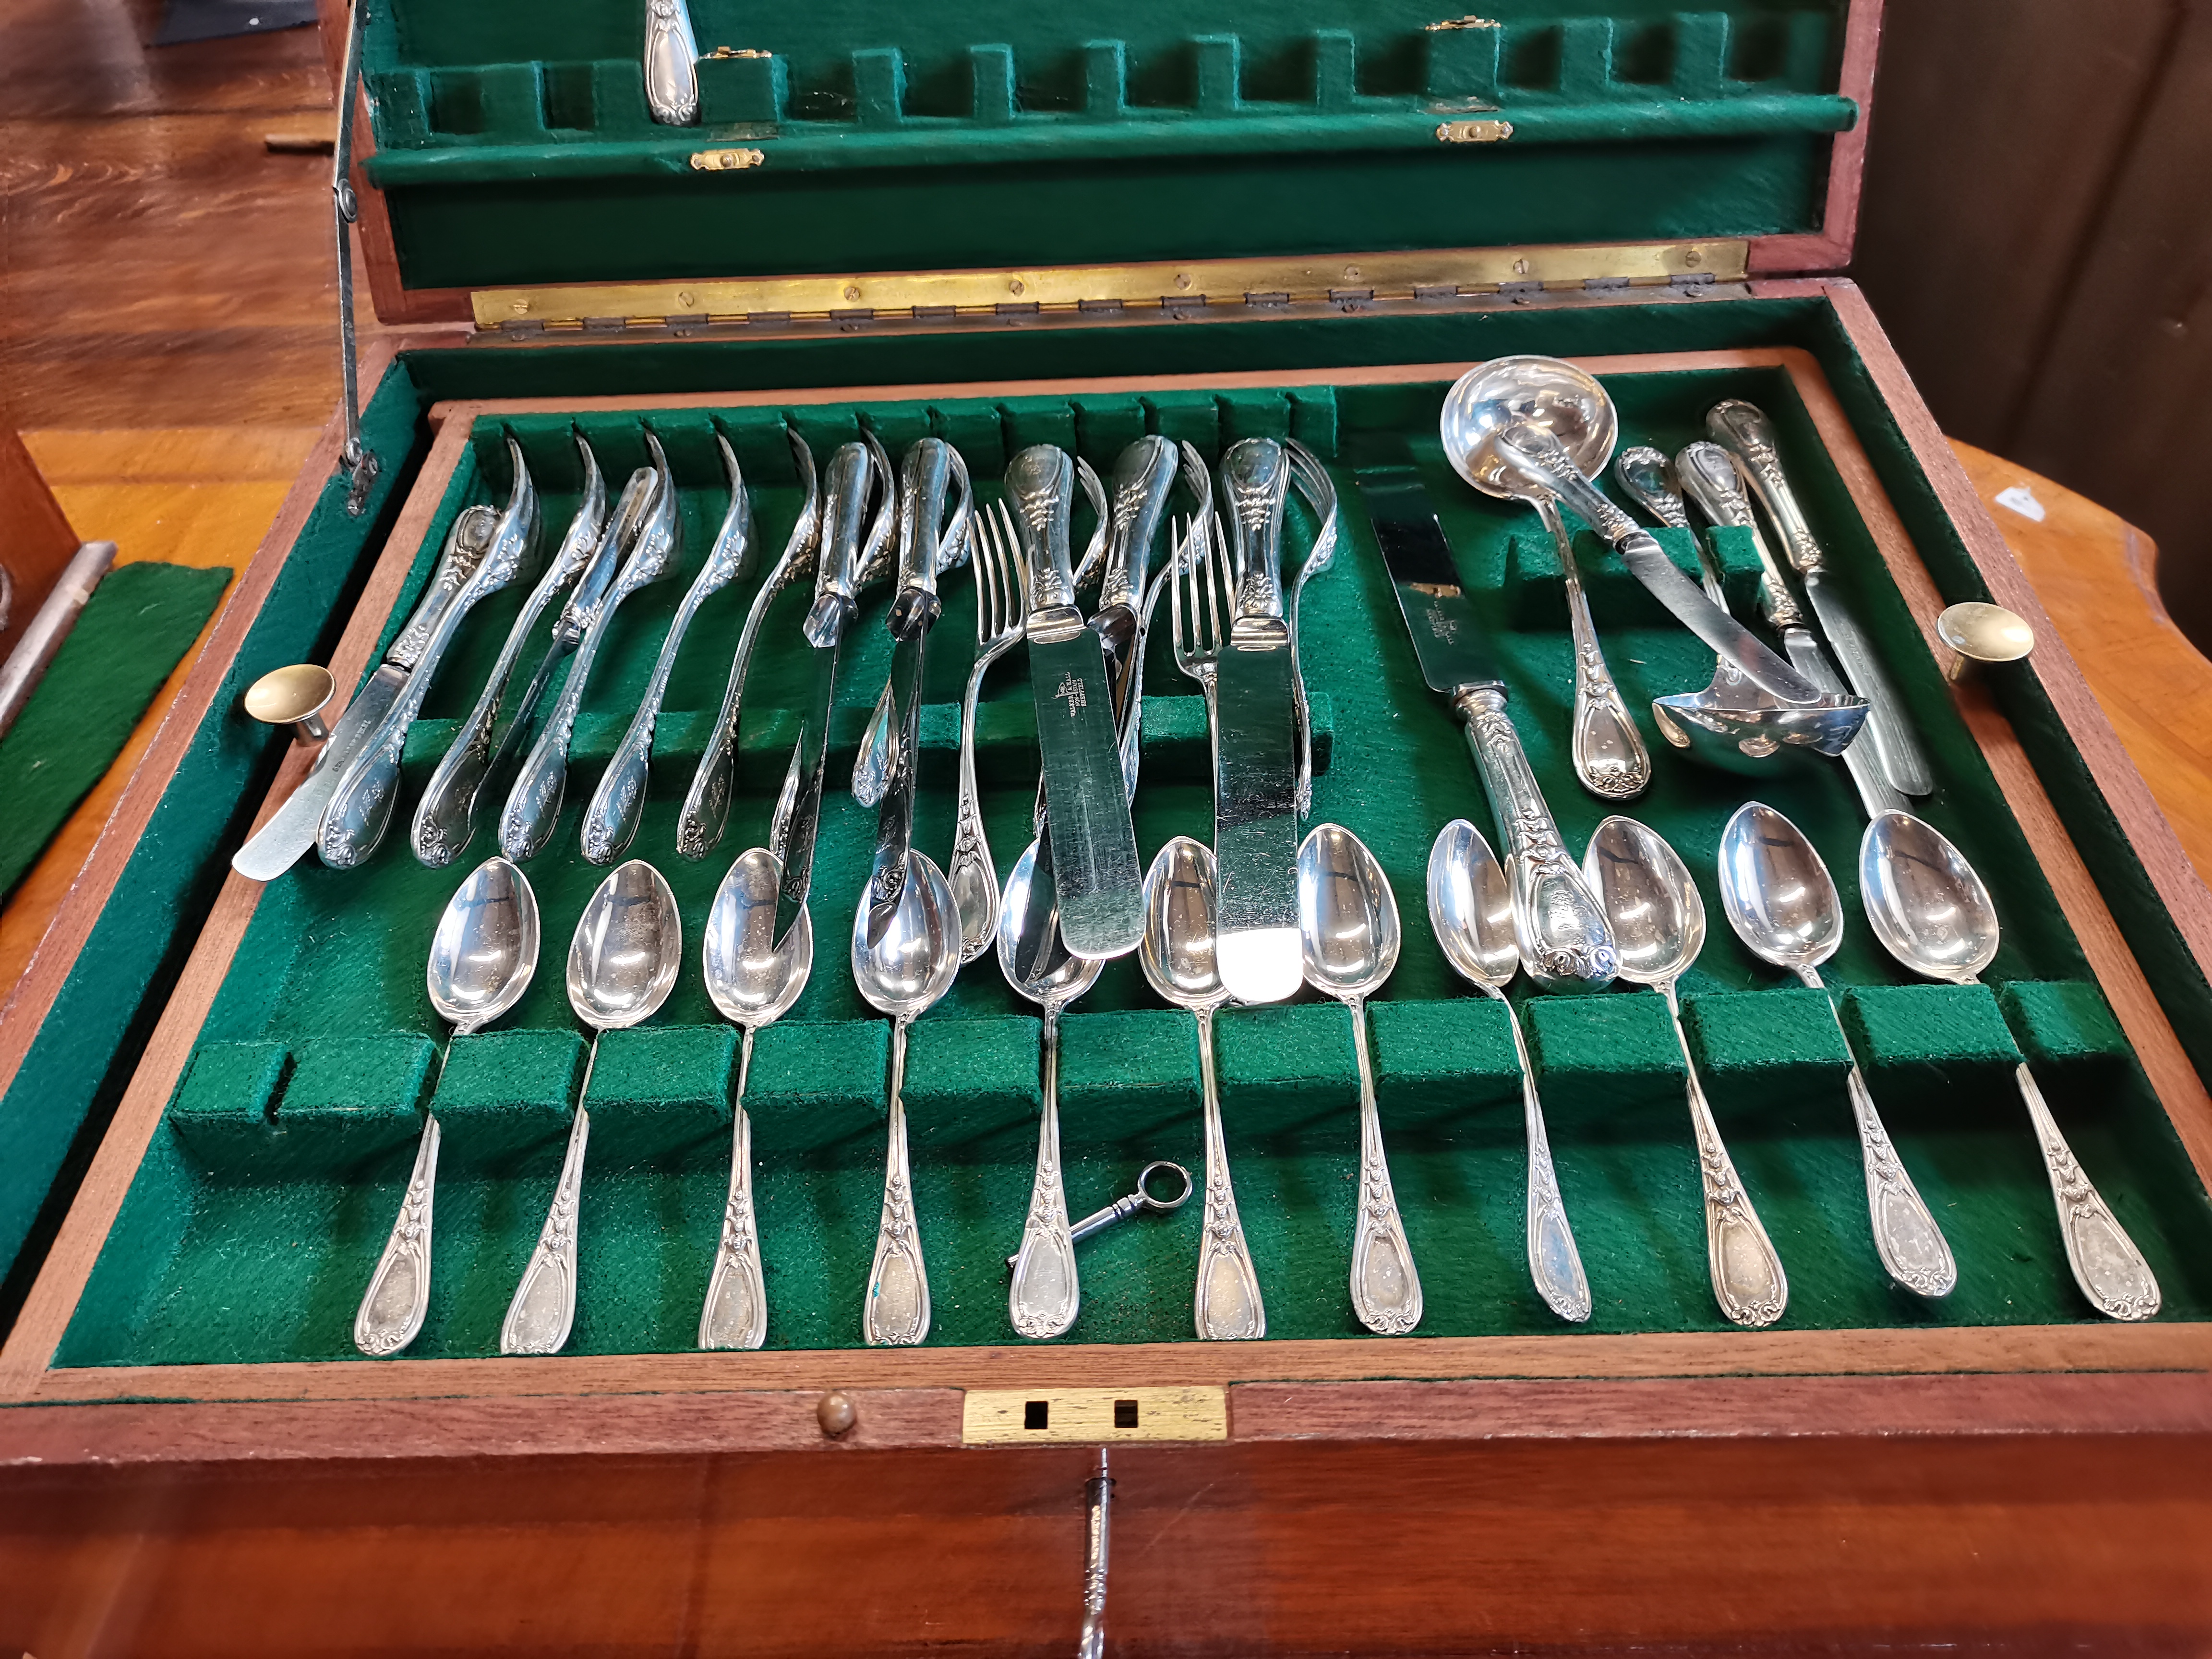 800 continental silver cutlery set in mahogany box Condition Grade:  A Excellent: - Image 7 of 7